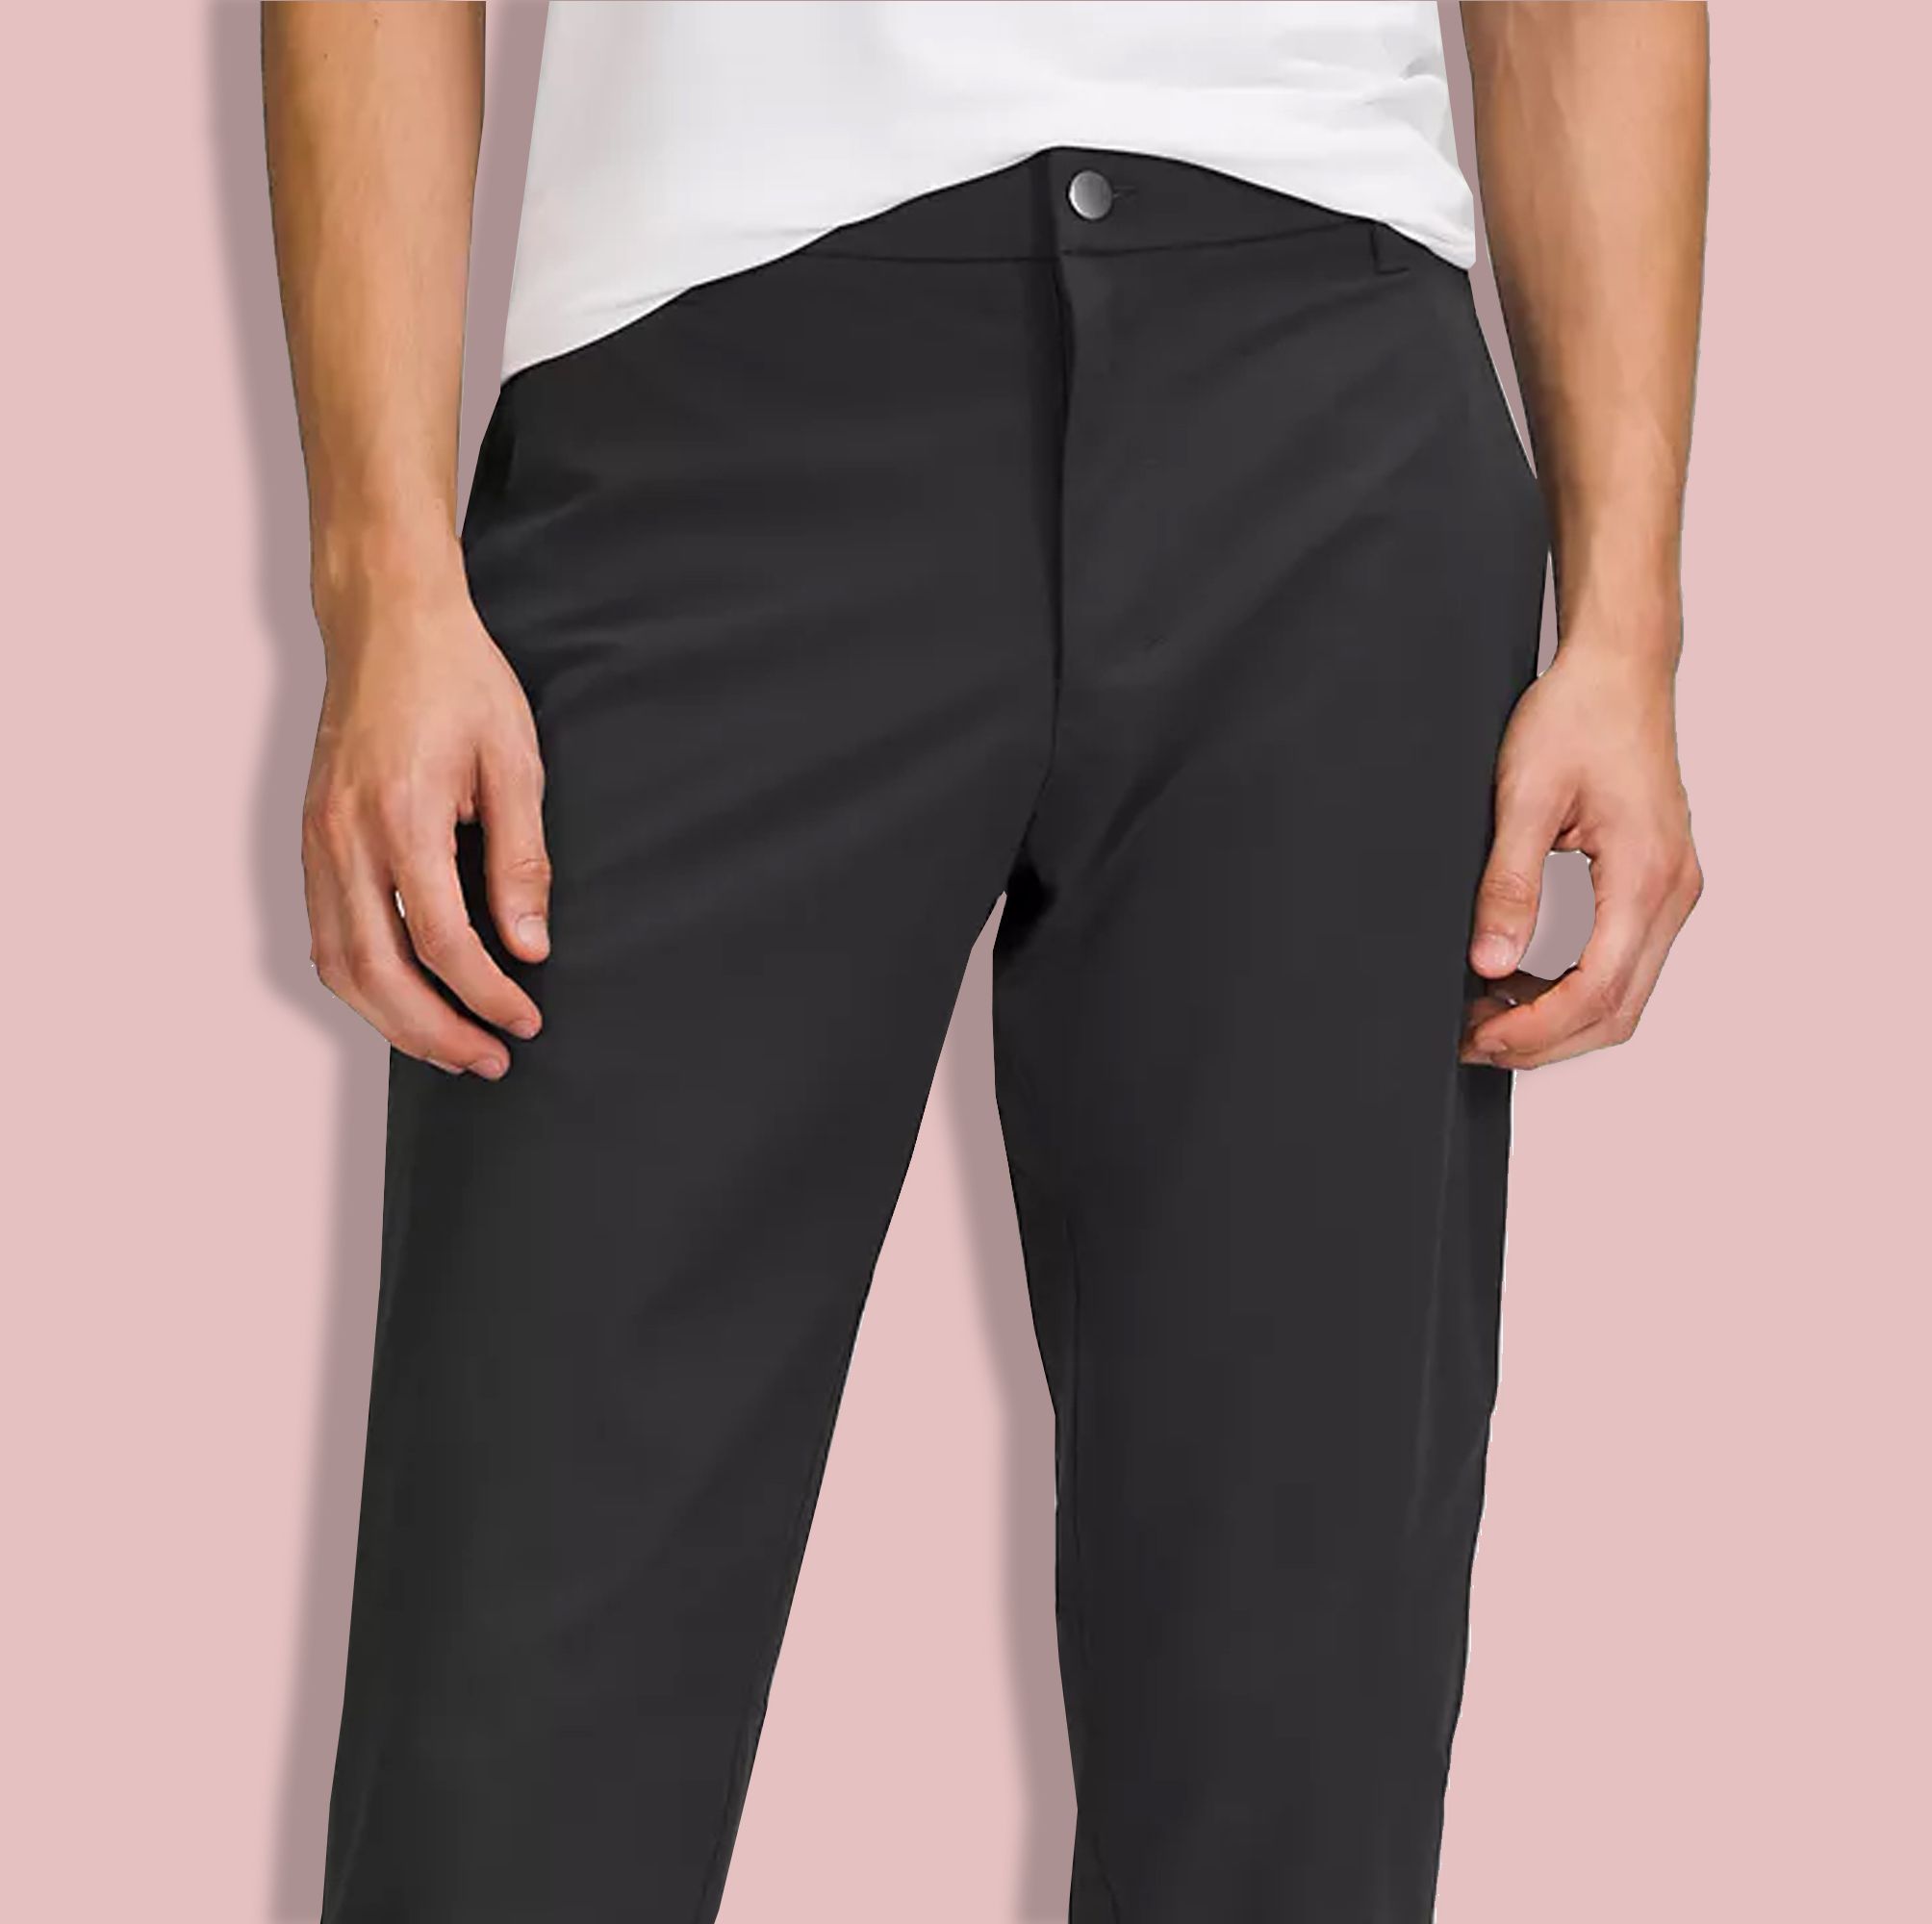 The 23 Best Pants to Wear to Work